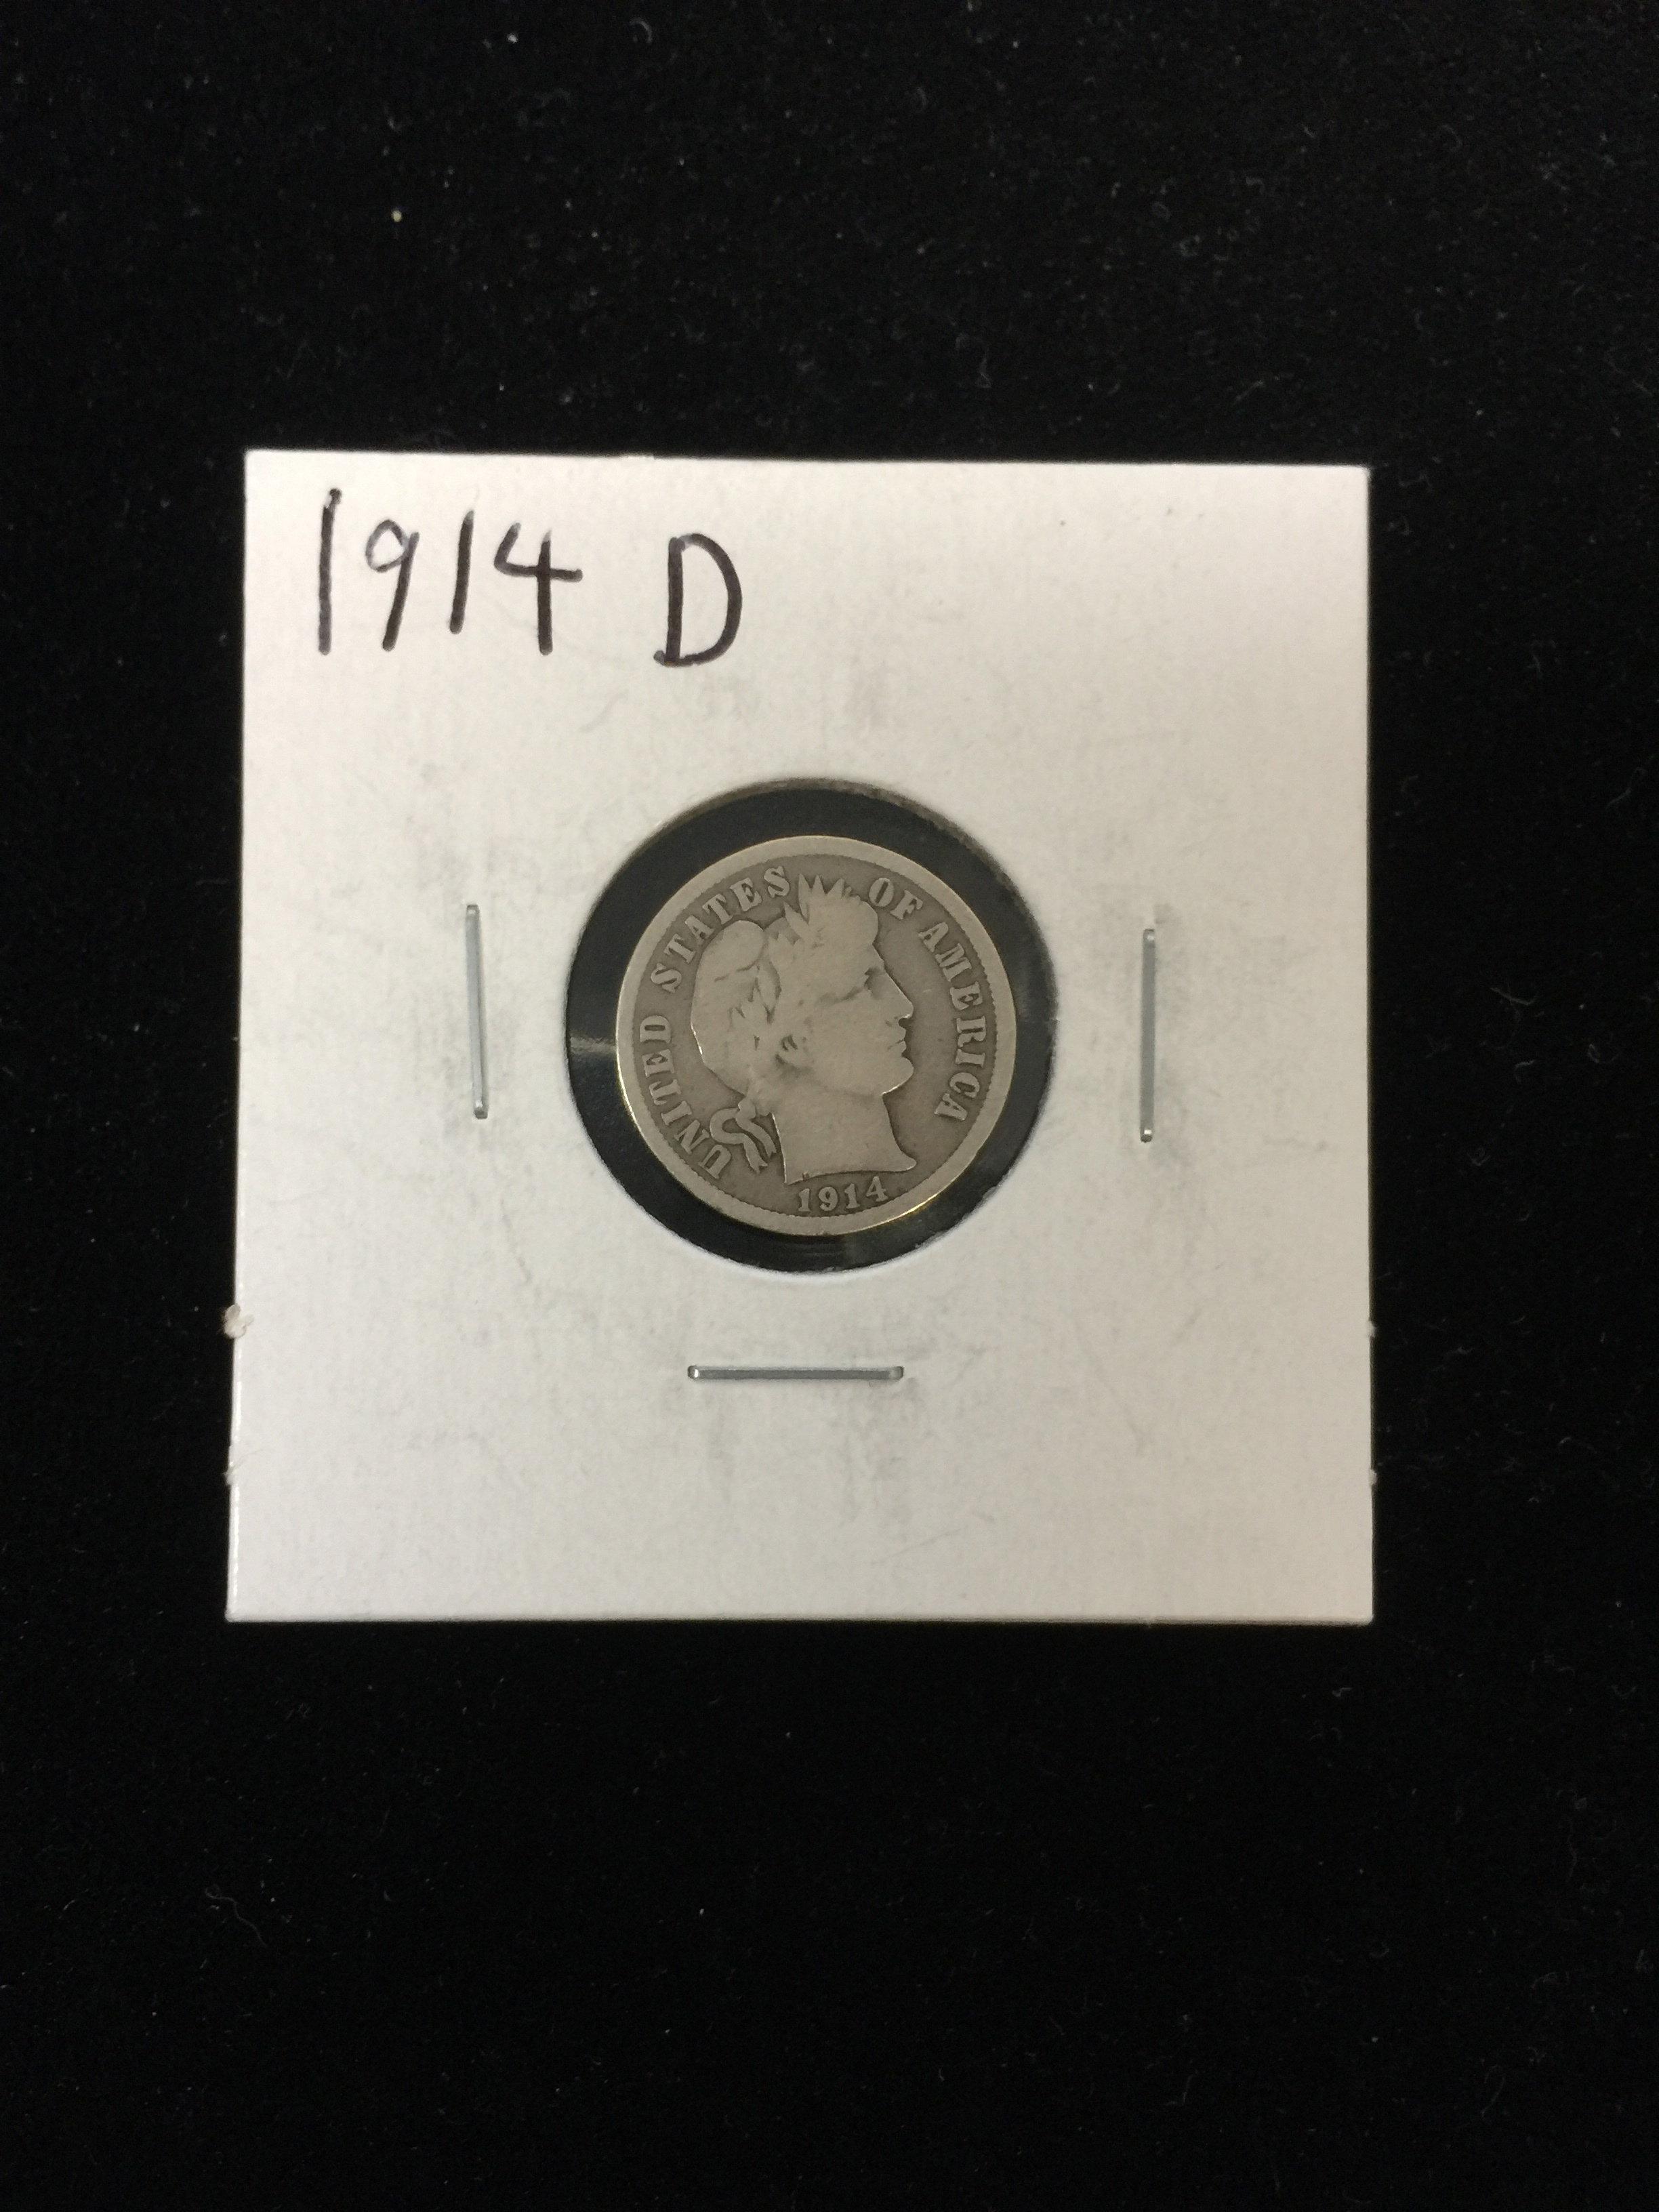 1914-D United States Barber Dime - 90% Silver Coin